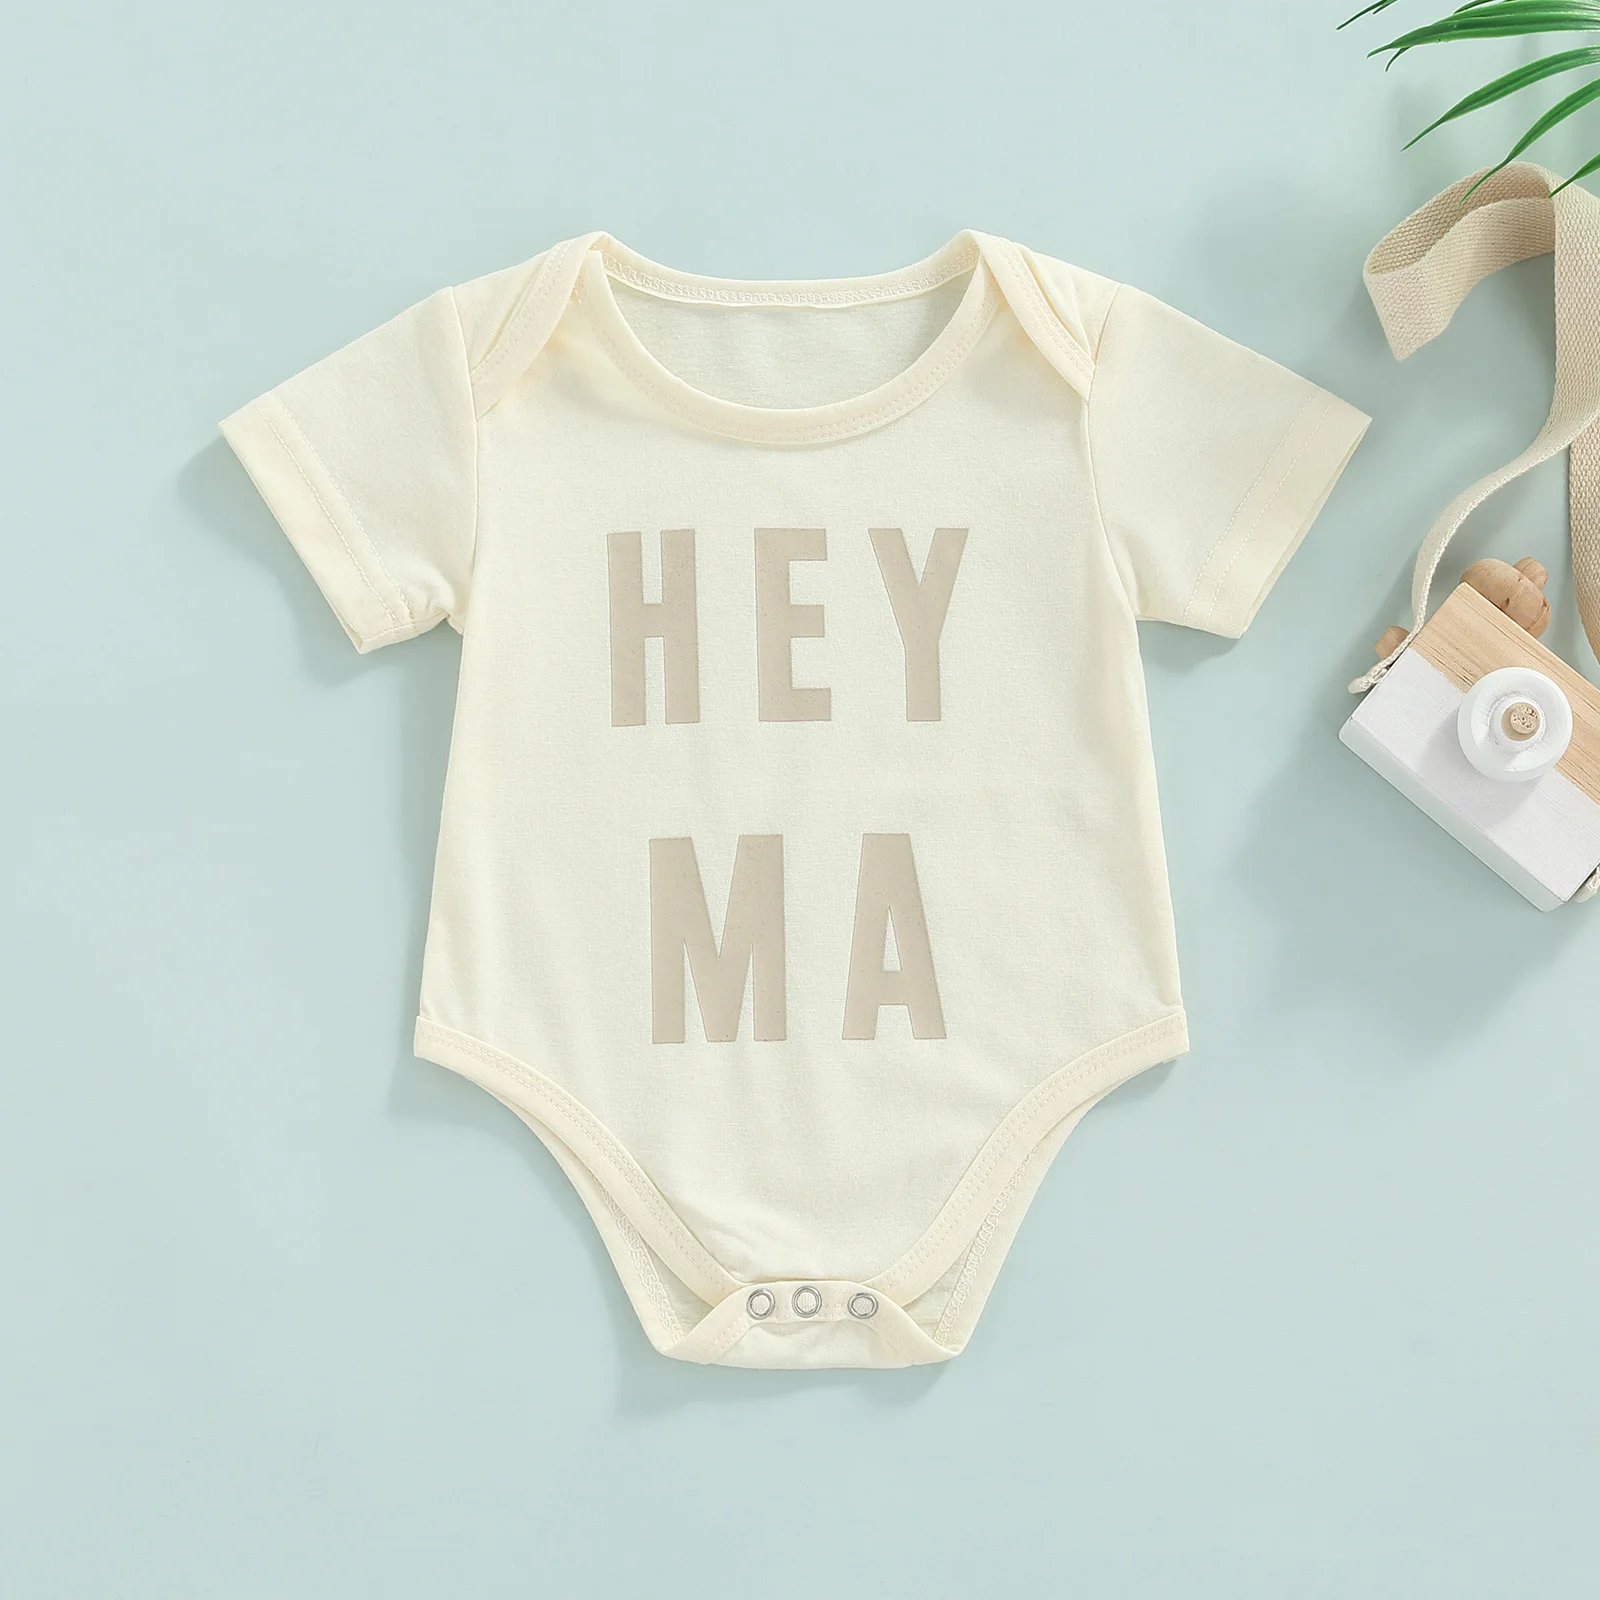 black baby bodysuits	 2022 0-18M HEY MA Casual lnfant Boy Girl Playsuit Letter Print Round Neck Short Sleeve Summer Romper Cotton Clothes Kids Outfit baby clothes cheap